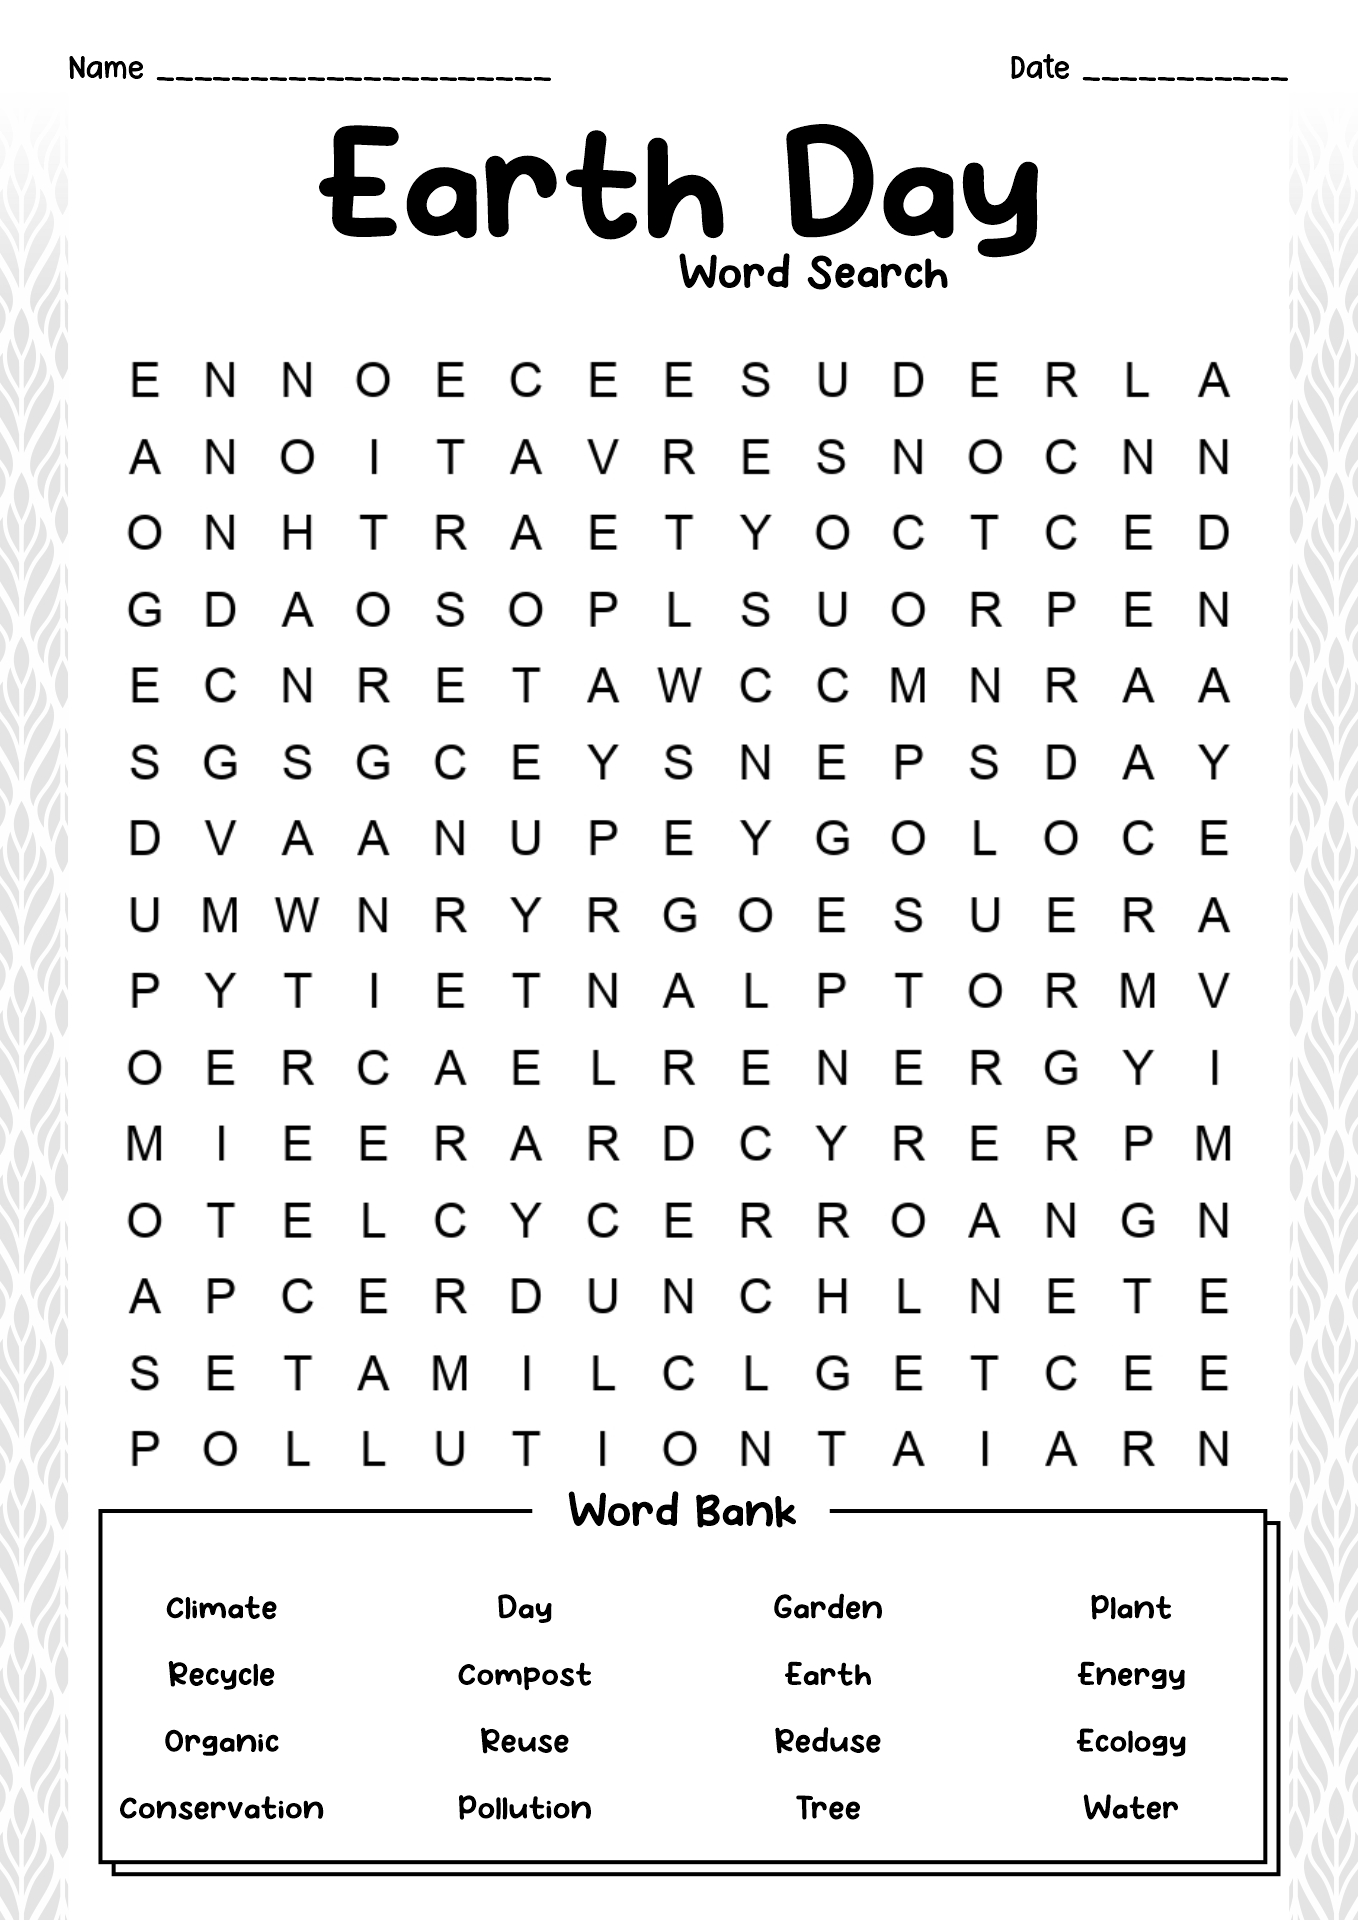 Earth Day Word Search Image